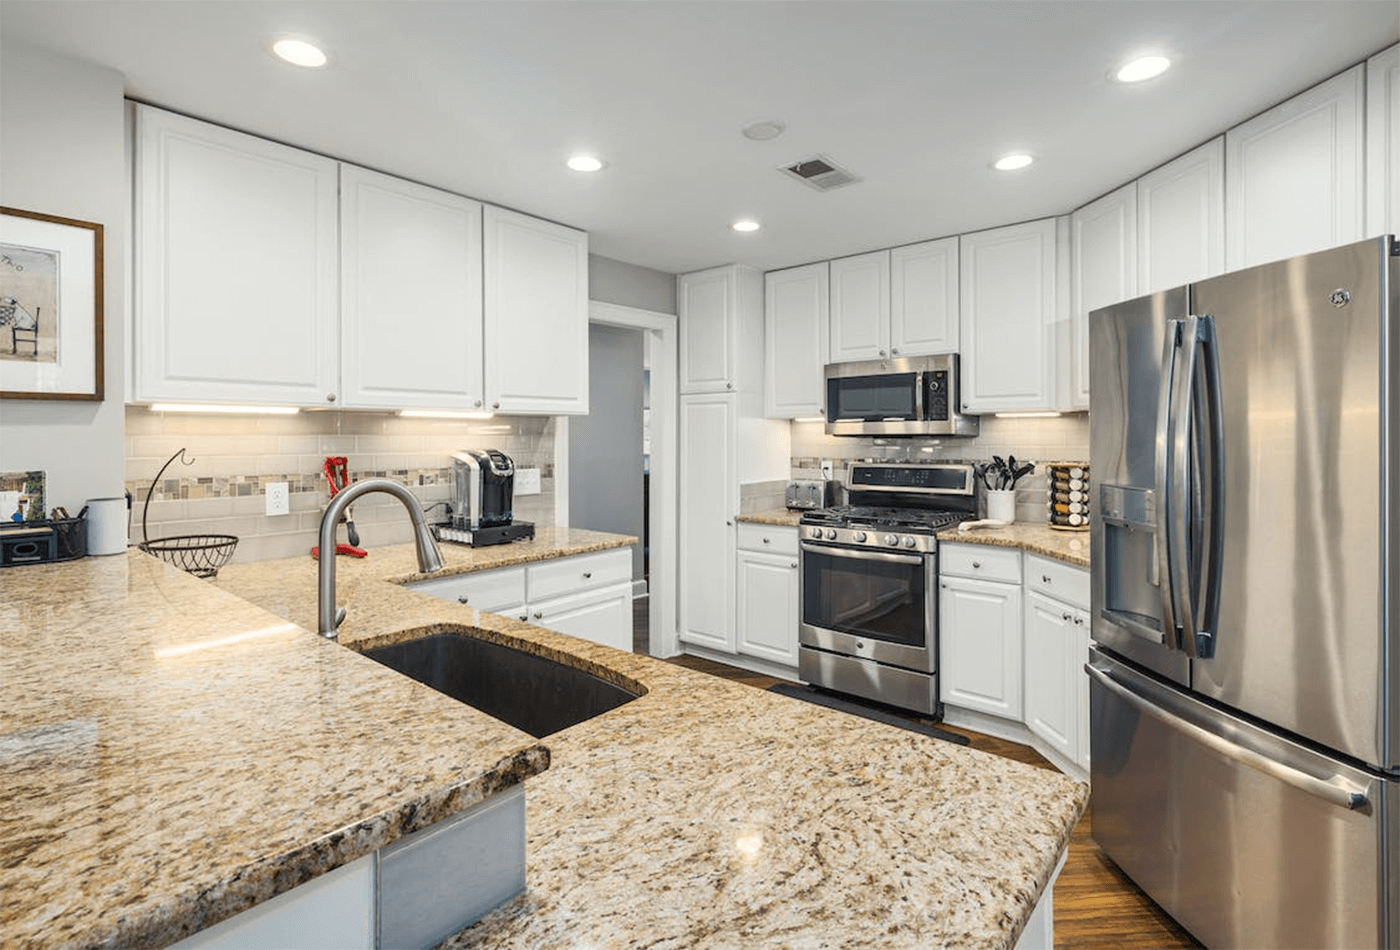 For Better Placement, Know What a Split Level Kitchen Is